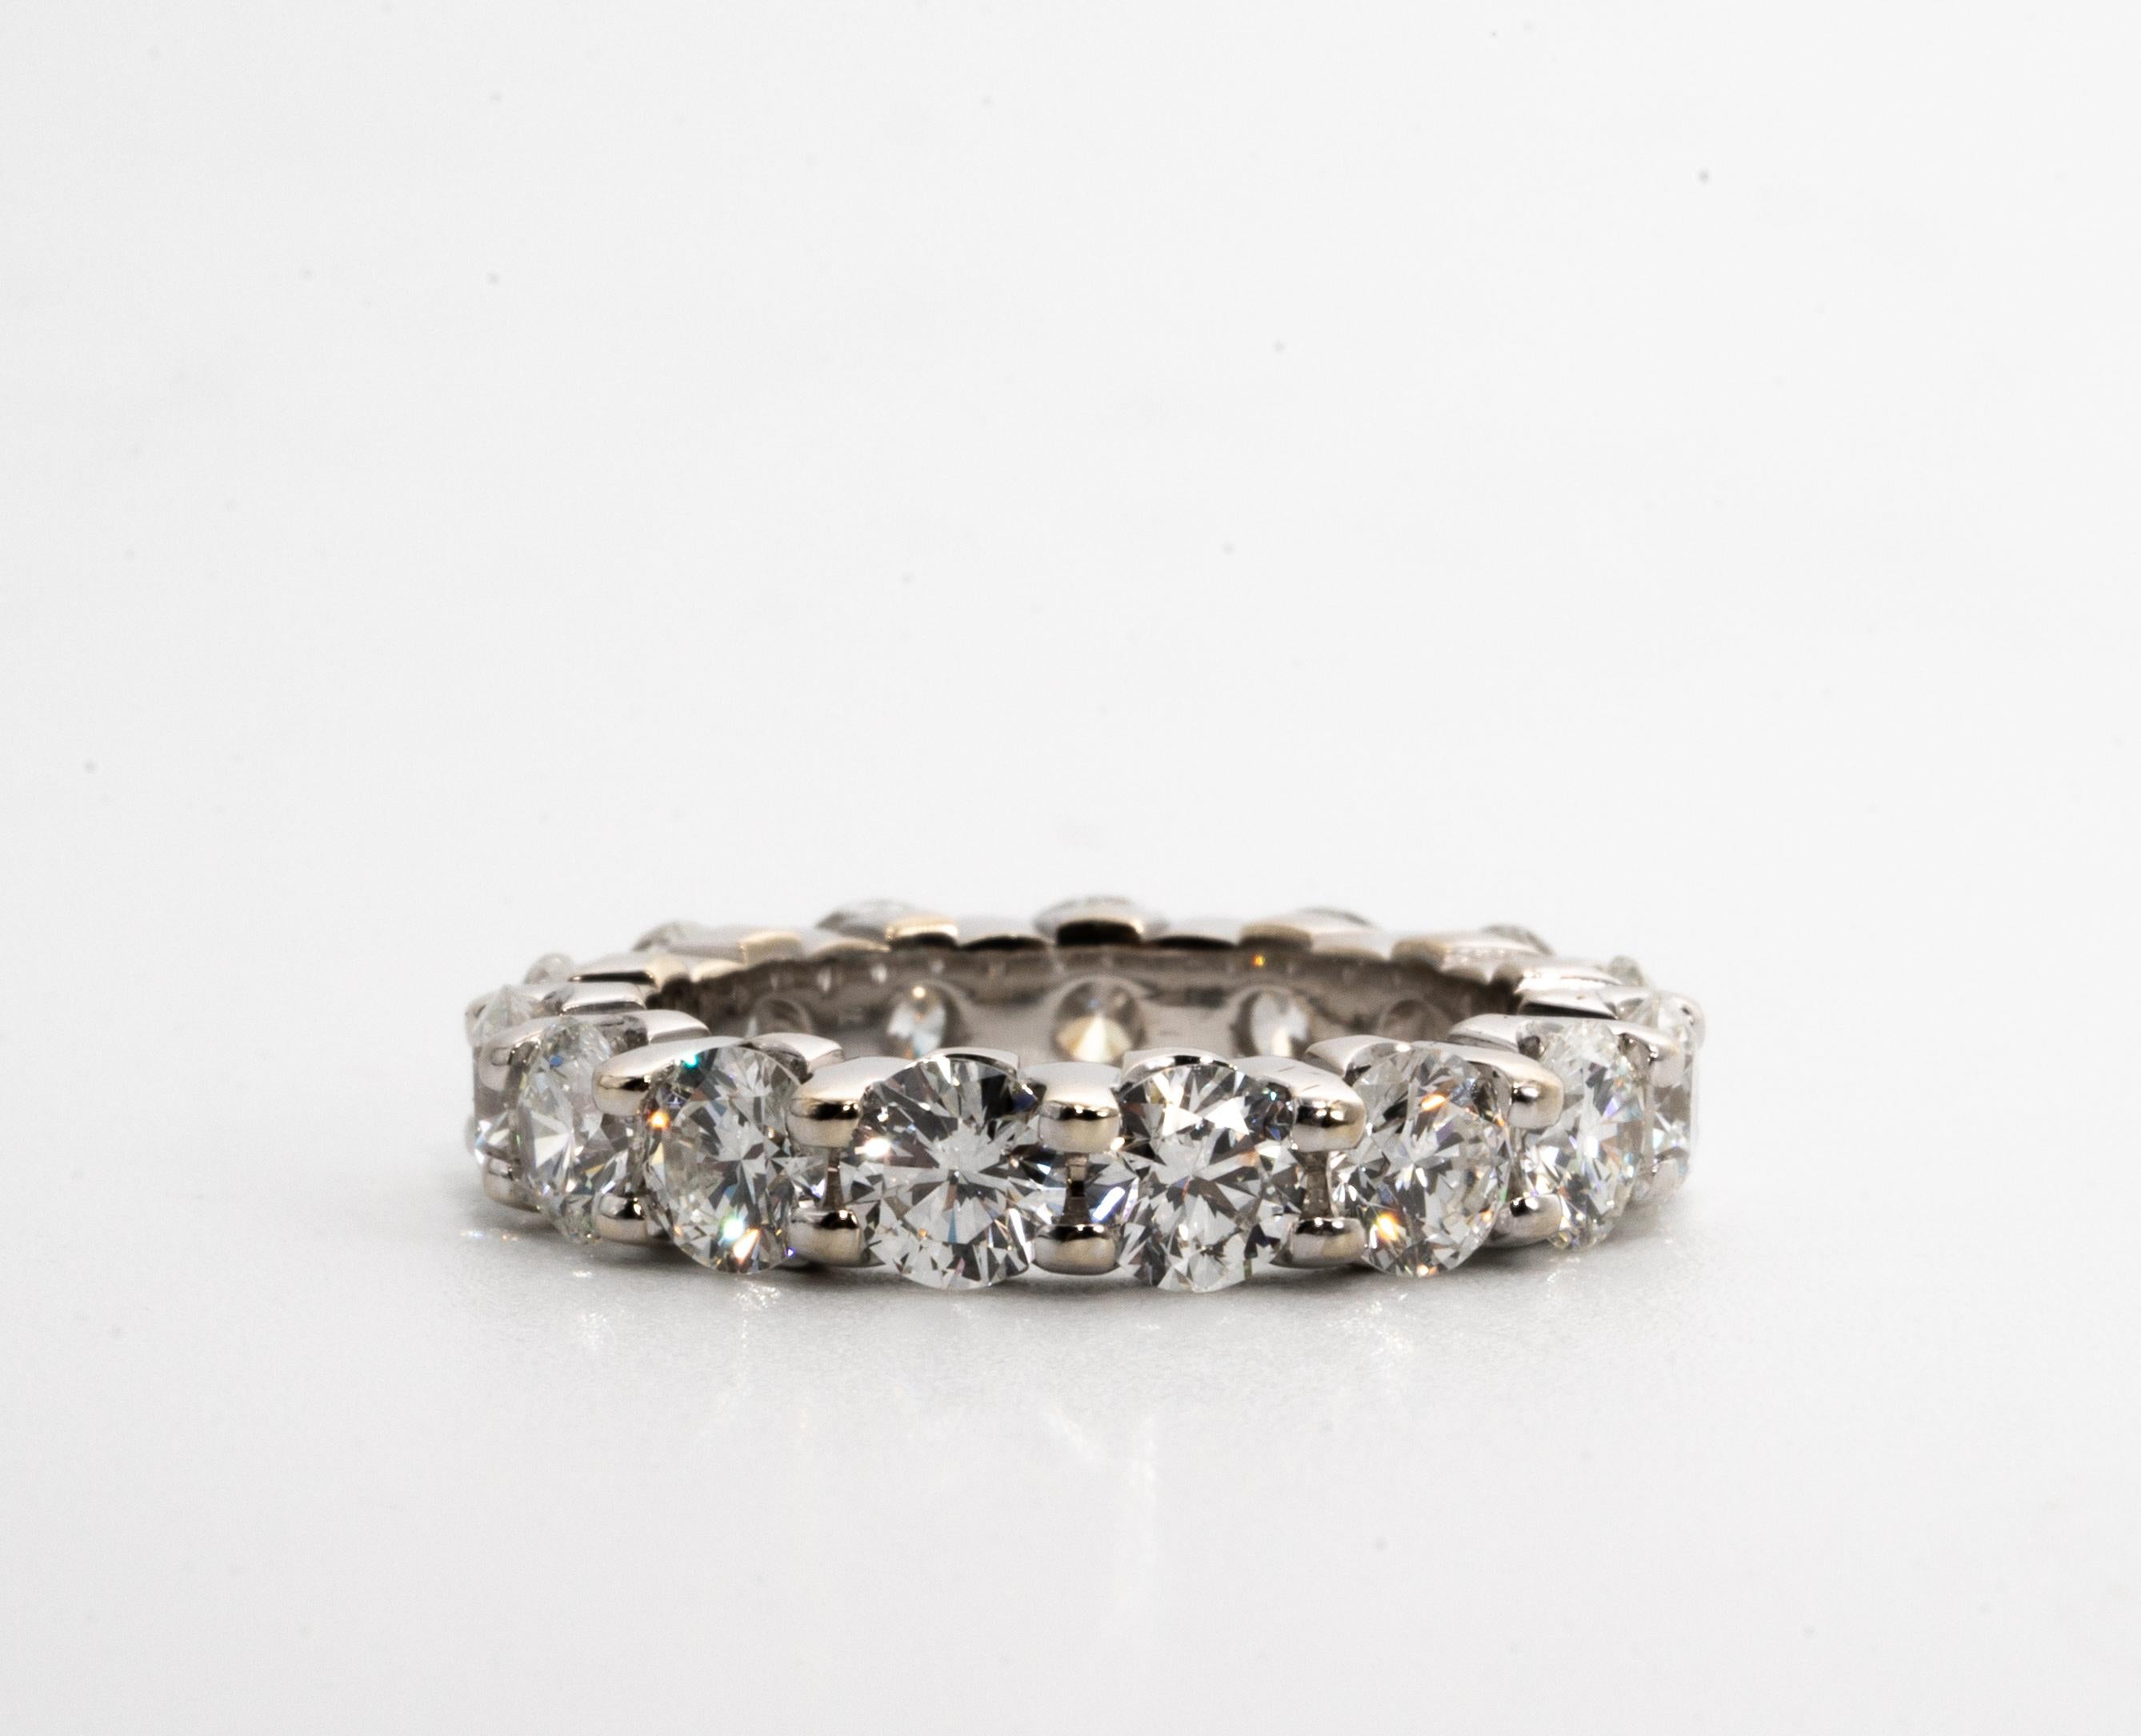 Diamond Eternity Ring in 18K White gold with 15 Round Brilliant diamonds
weighing a total weight of 4.71 Cts , in D-E Color , VS clarity or better.  

Ring Size:  6.5

*This ring can be custom made to any finger size - Please inquire for details